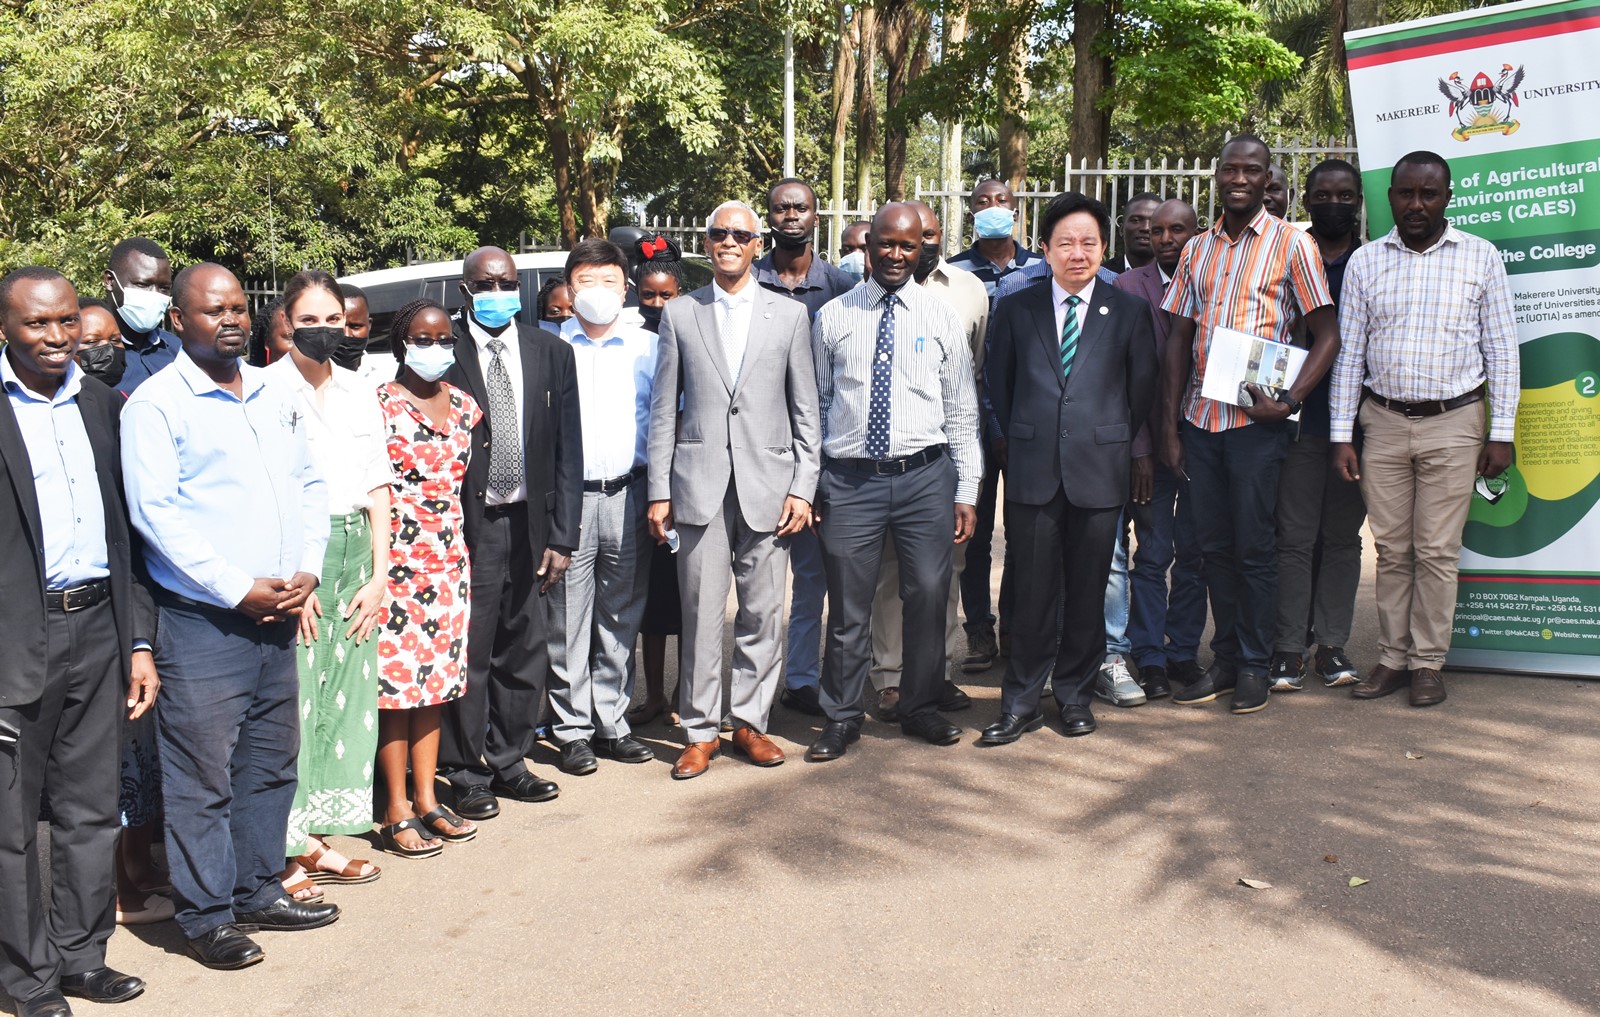 The Director, Office of South-South and Triangular Cooperation Division, FAO-Mr Anping Ye (3rd R), FAO Country Representative-Dr. Querido Antonio (5th R), Ag. Principal CAES-Prof. Yazidhi Bamutaze (4th R) and participants after the opening ceremony on 13th June 2022, CoCIS, Makerere University.